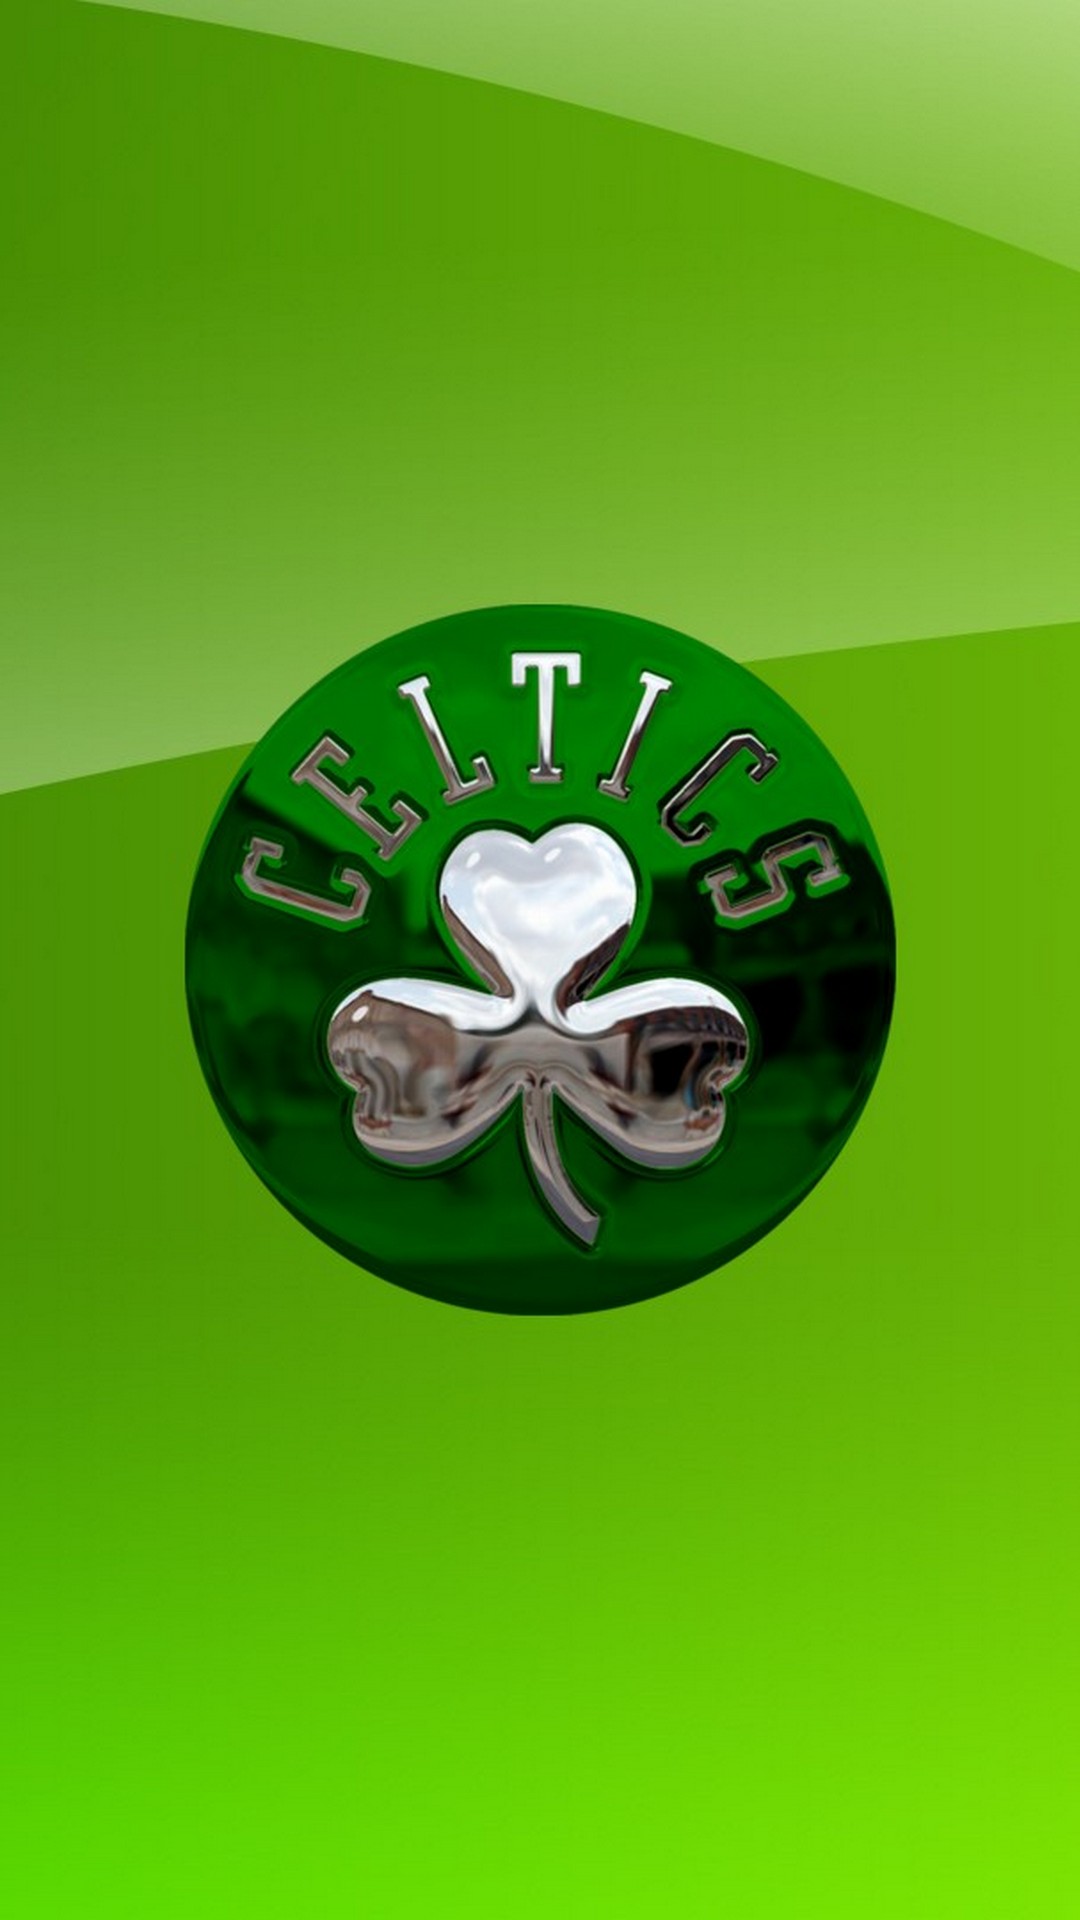 Android Wallpaper HD Boston Celtics with image resolution 1080x1920 pixel. You can make this wallpaper for your Android backgrounds, Tablet, Smartphones Screensavers and Mobile Phone Lock Screen